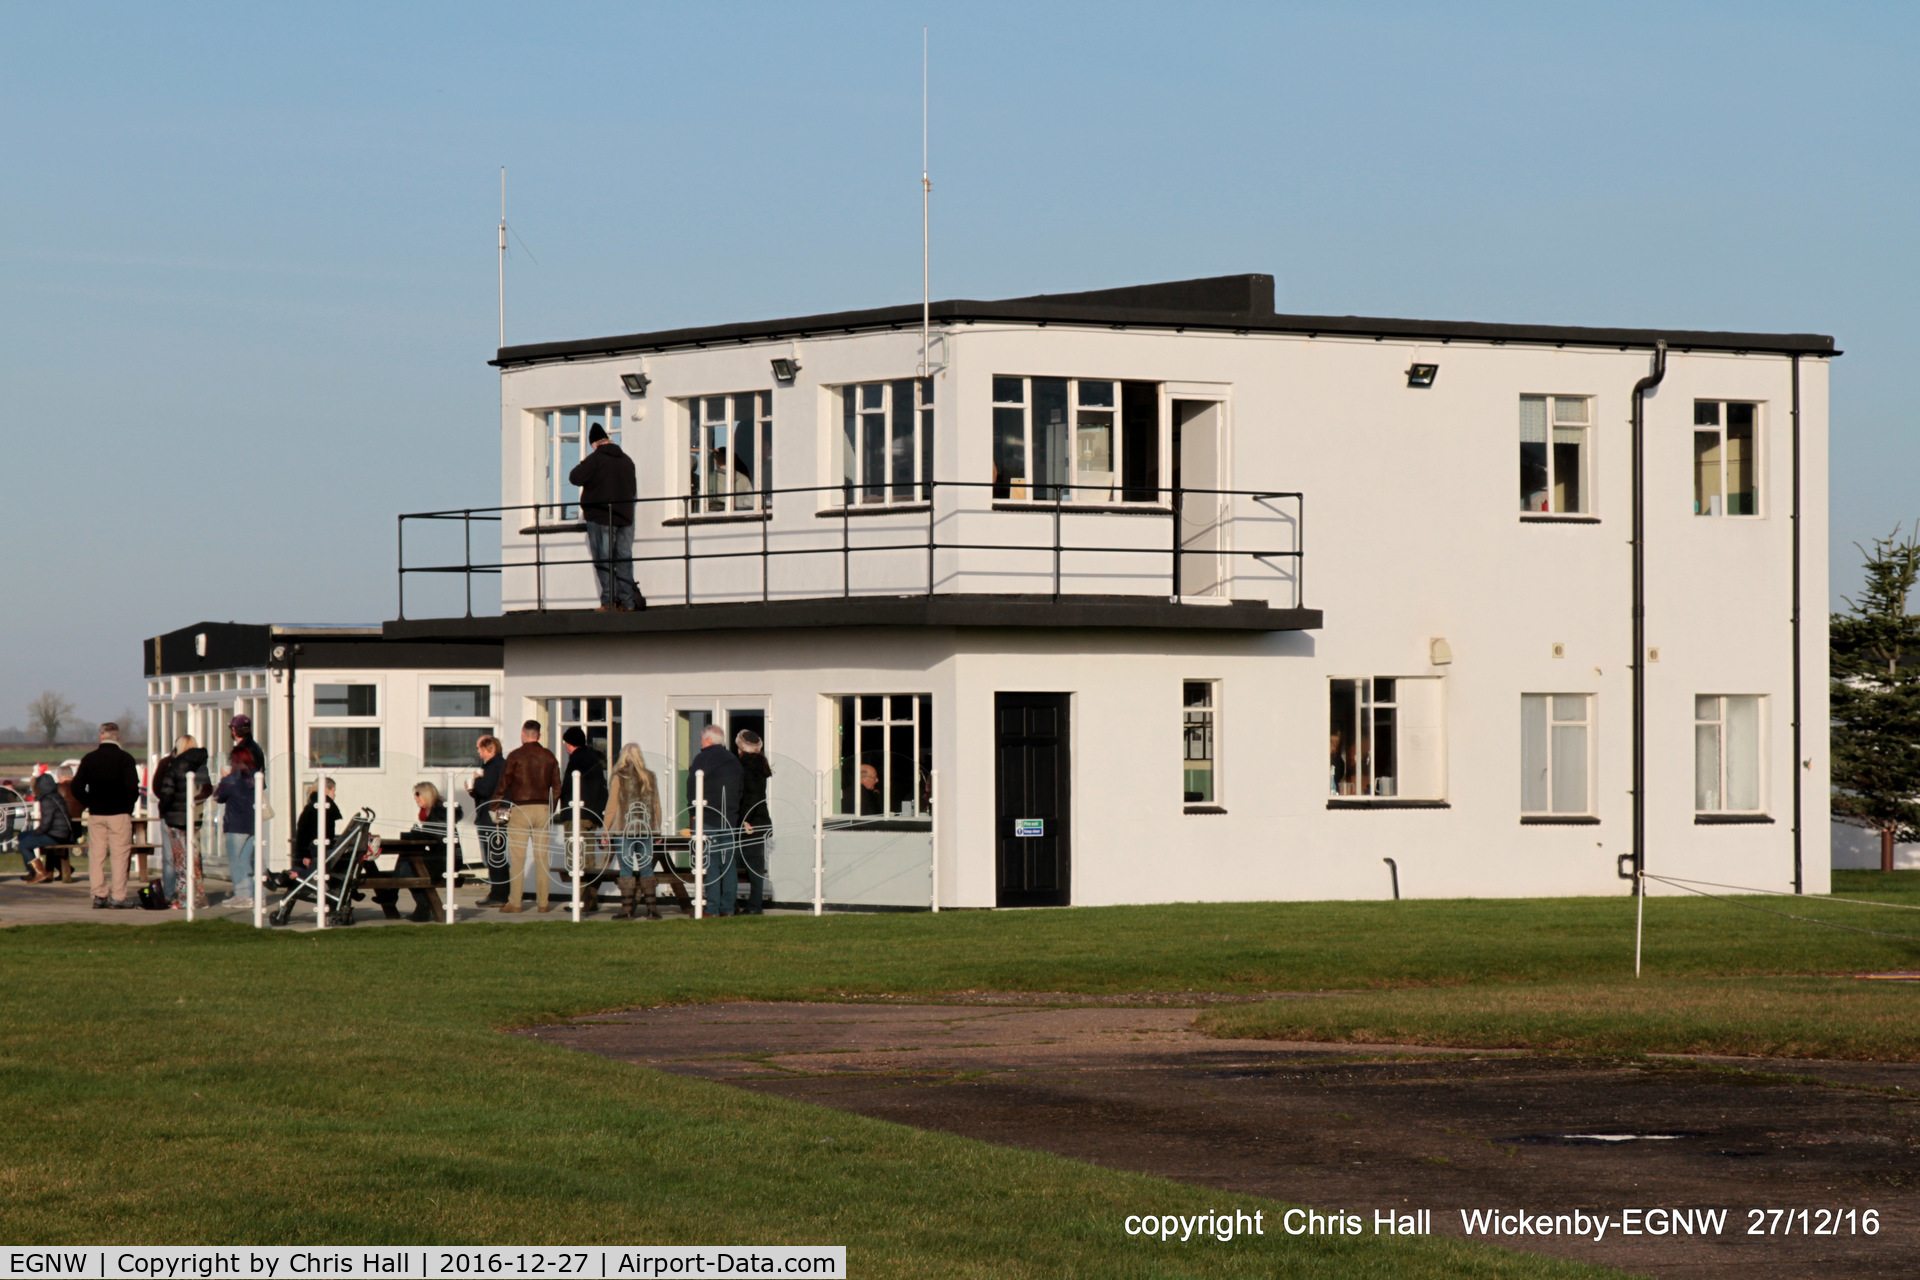 Wickenby Aerodrome Airport, Lincoln, England United Kingdom (EGNW) - Wickenby Tower